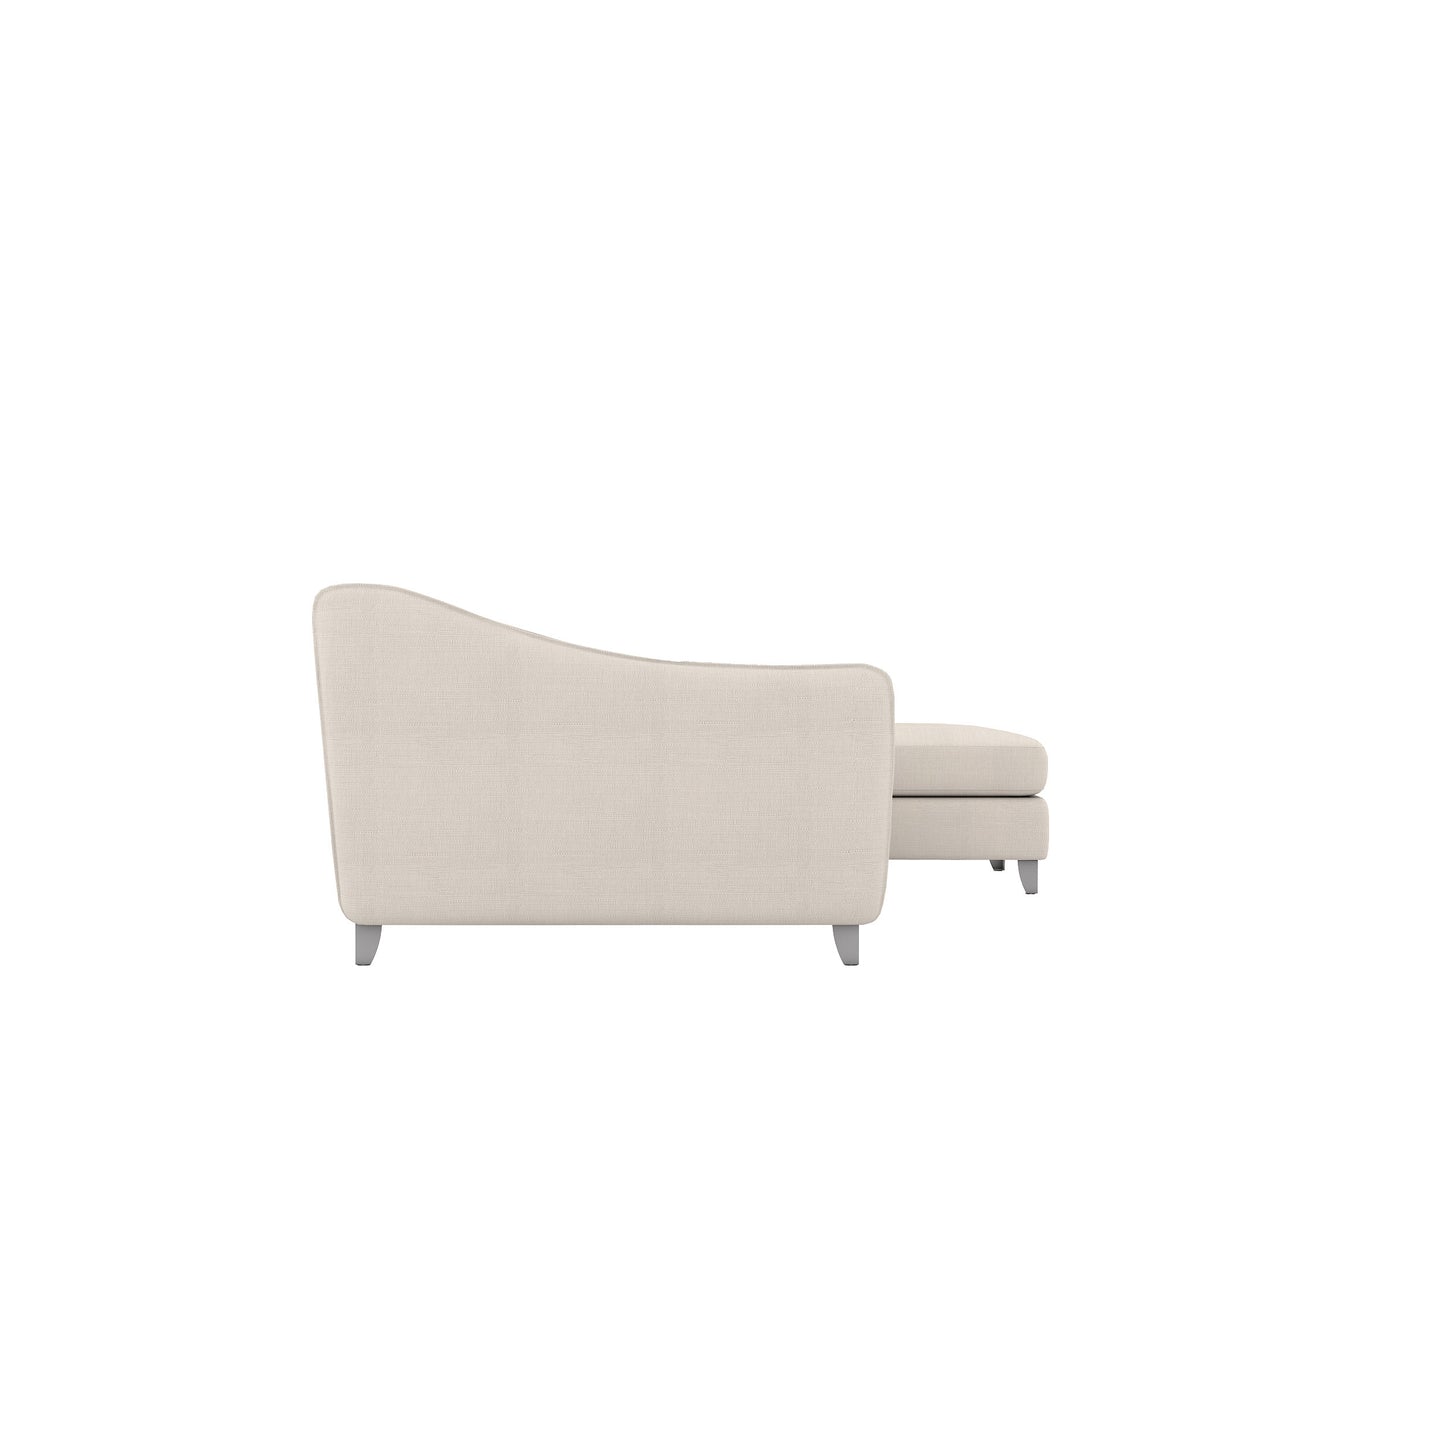 Monterey Outdoor Right Arm Chaise